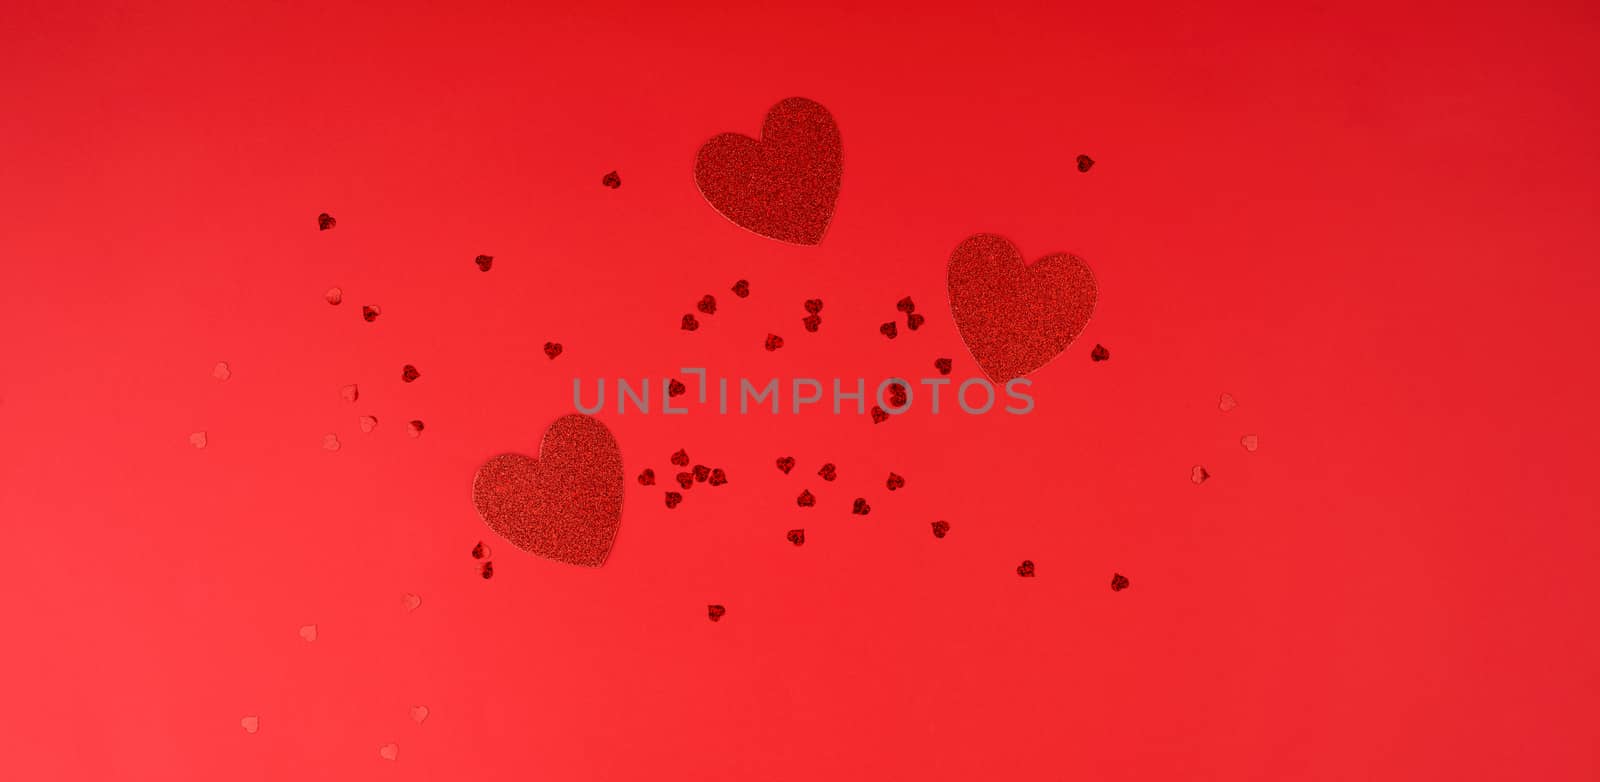 paper red shiny decorative hearts on a red background, abstract festive backdrop for valentines day february 14